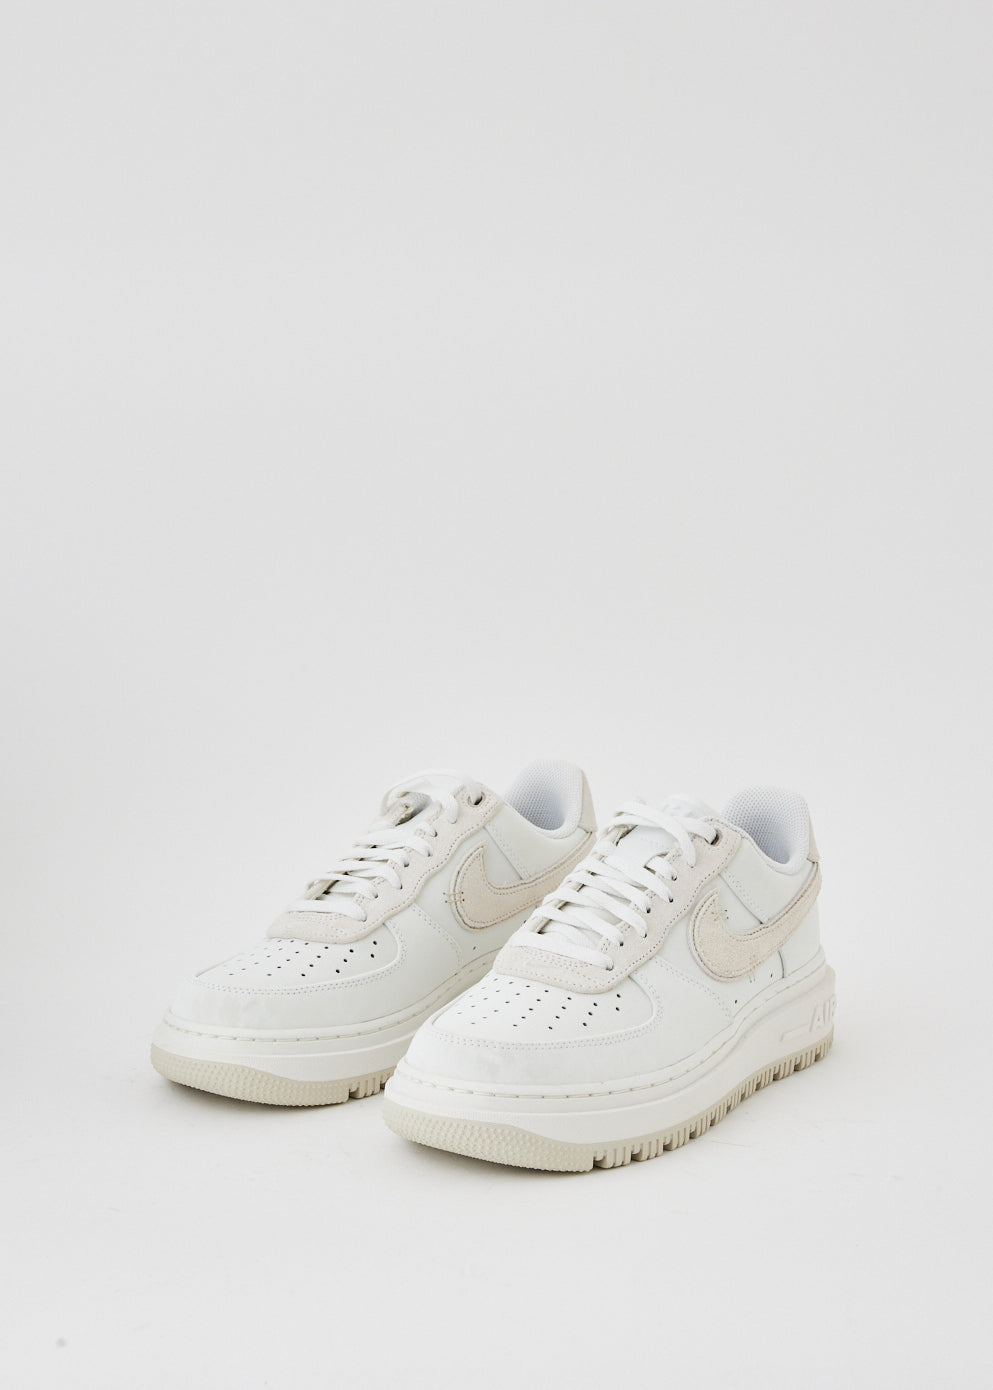 Air Force 1 Luxe